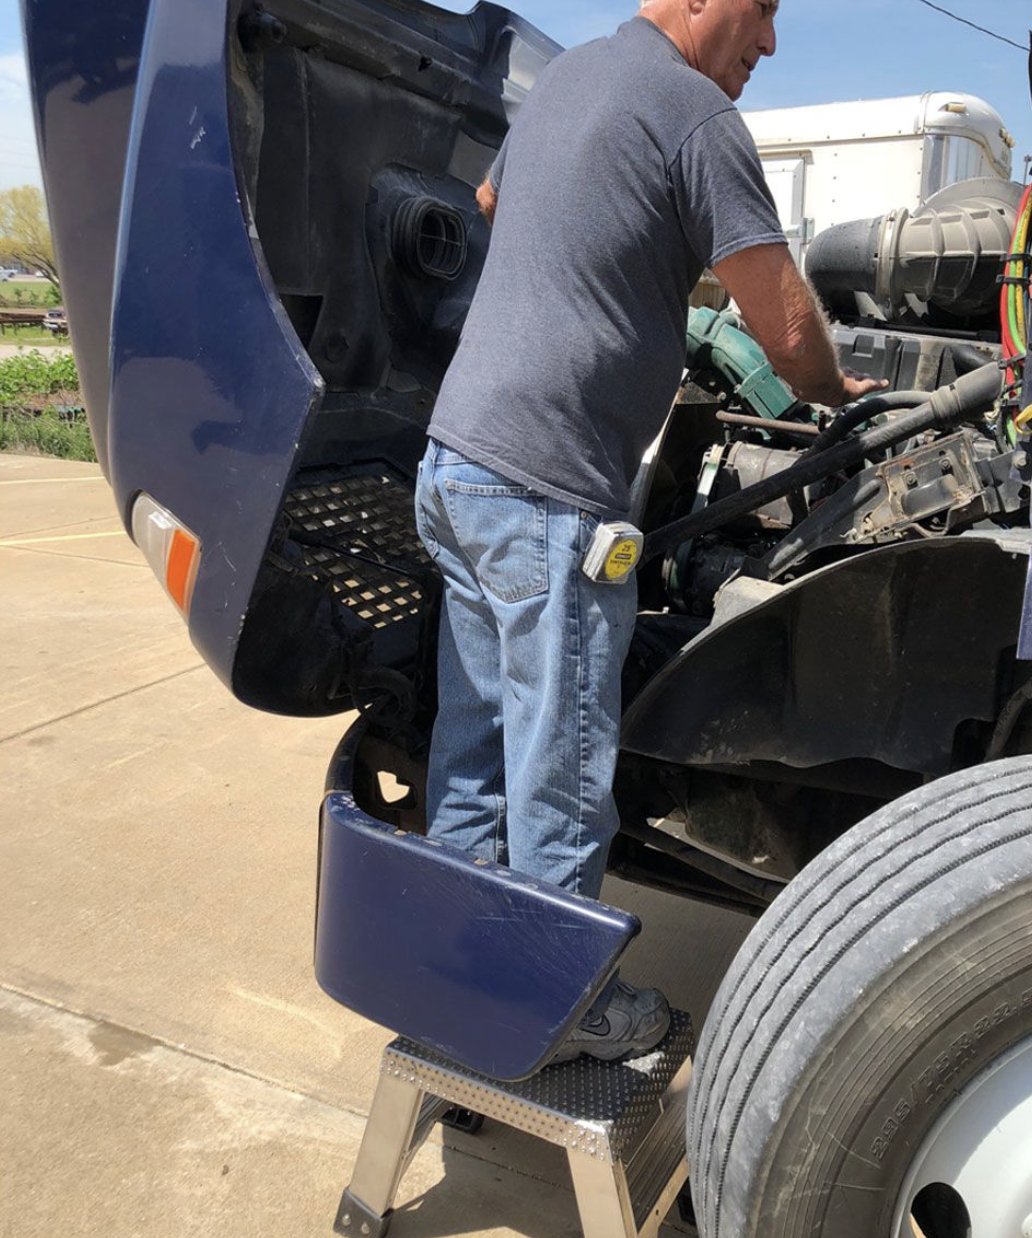 this image shows mobile diesel mechanics in Brownsville, TX